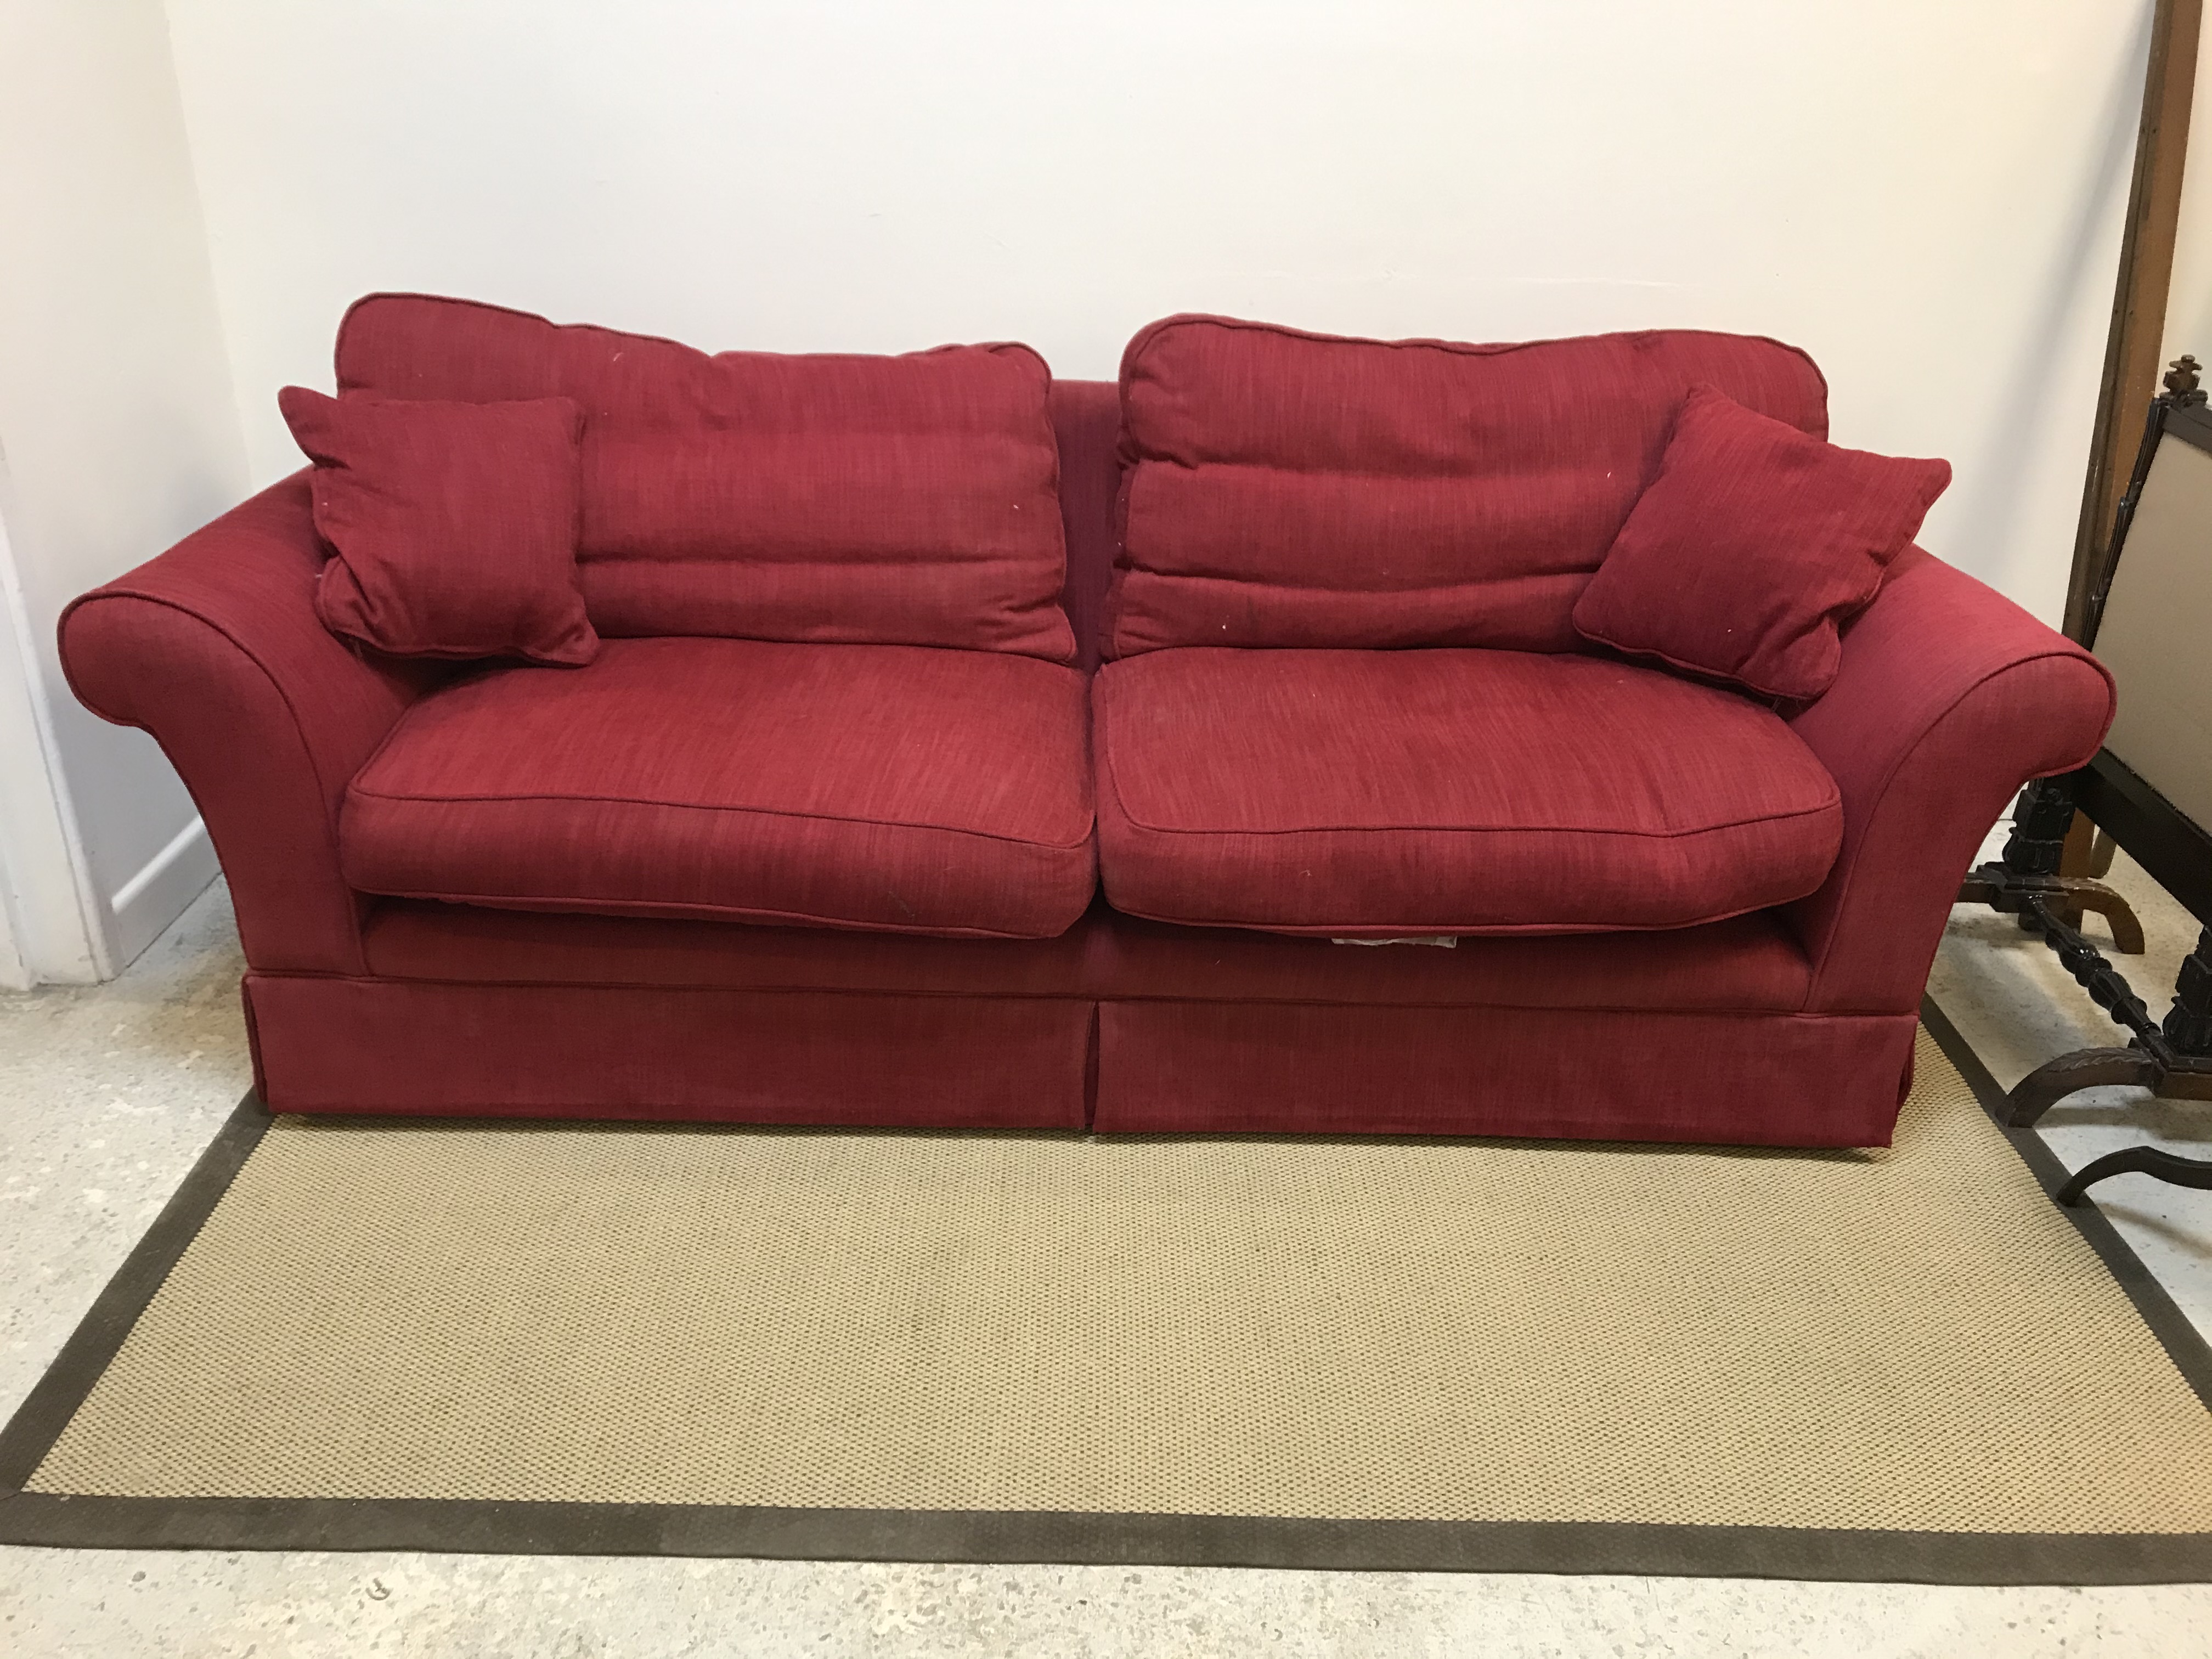 A modern red upholstered two seat sofa, 220 cm wide x 90 cm deep x 80 cm high